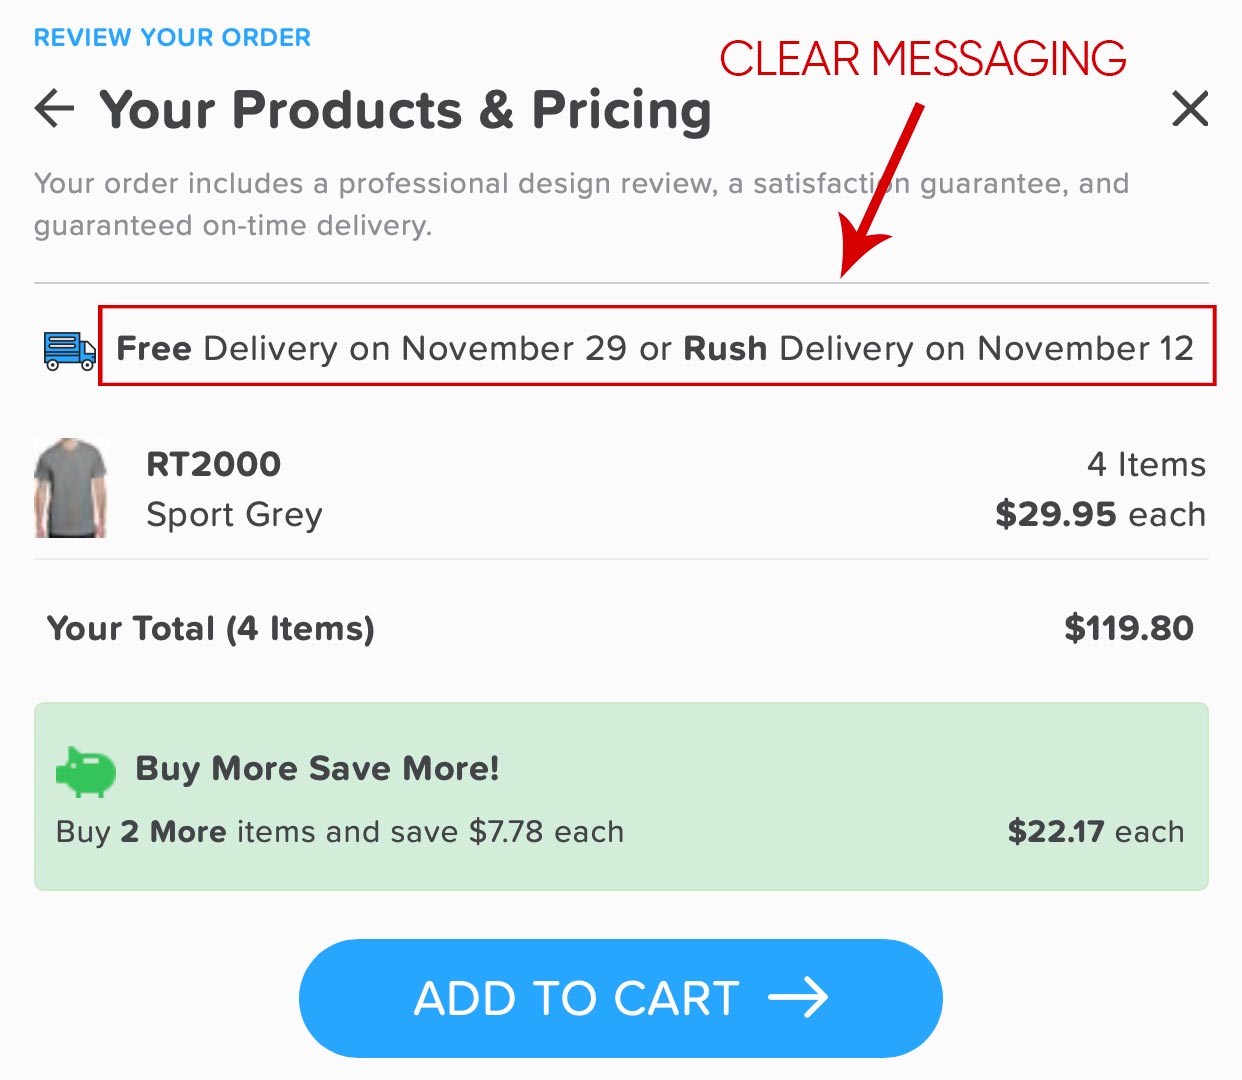 Production time messaging on a product page